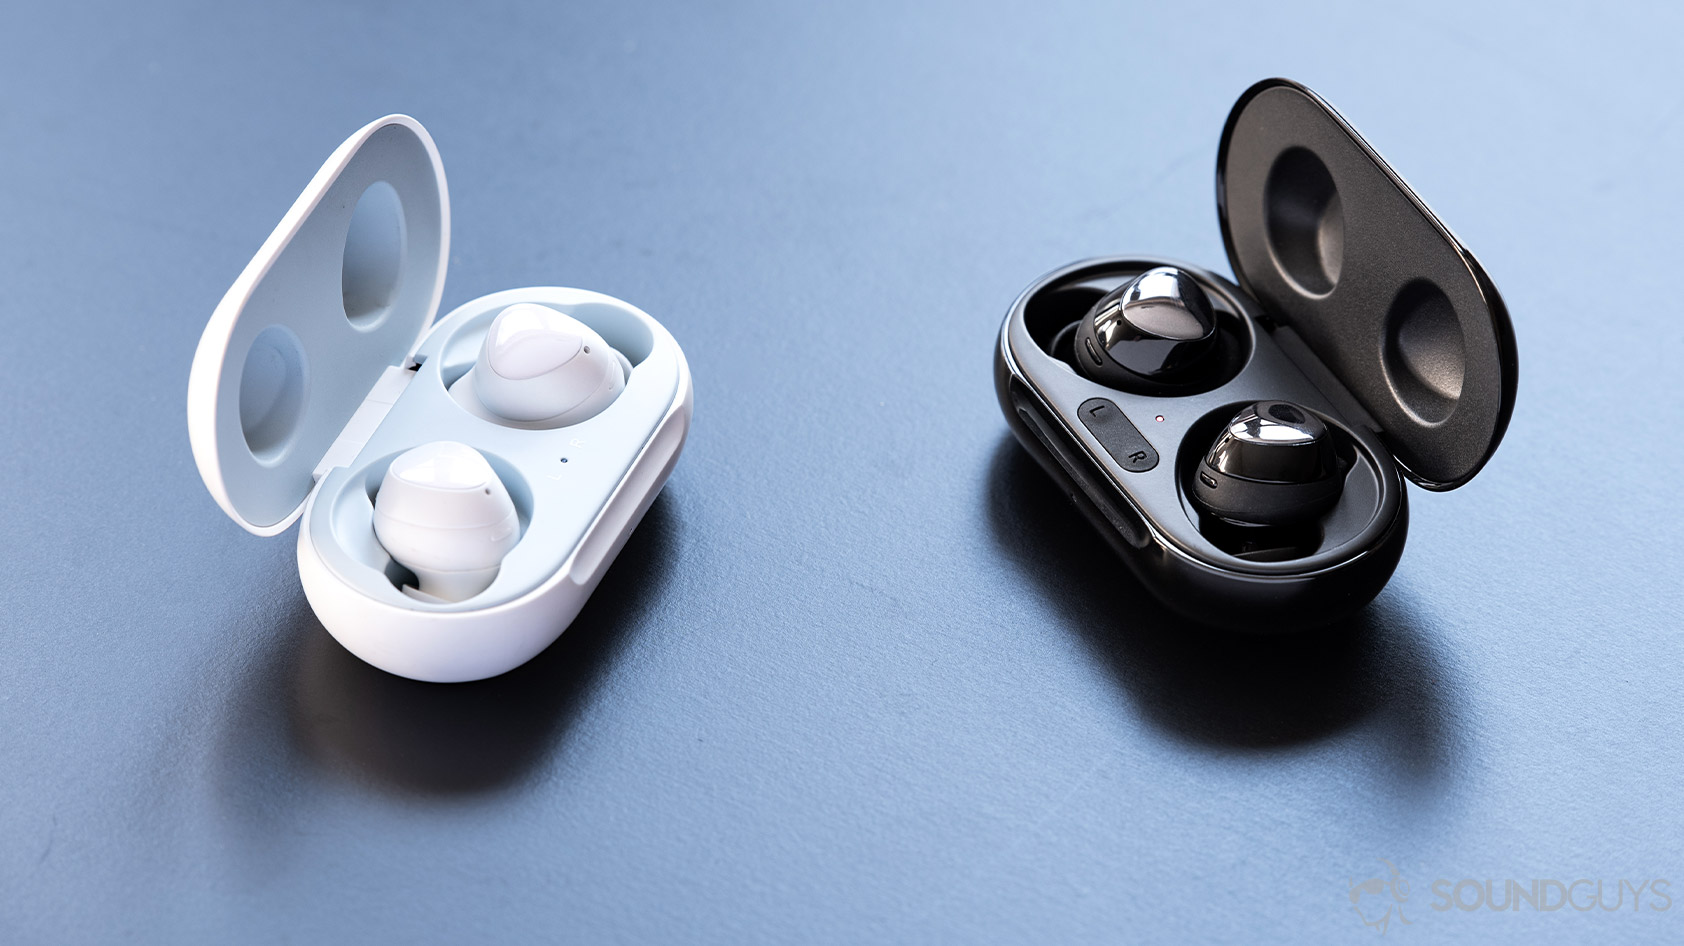 A picture of the Samsung Galaxy Buds Plus and Galaxy Buds side by side in a comparison with the charging cases open to reveal the respective true wireless earbuds.